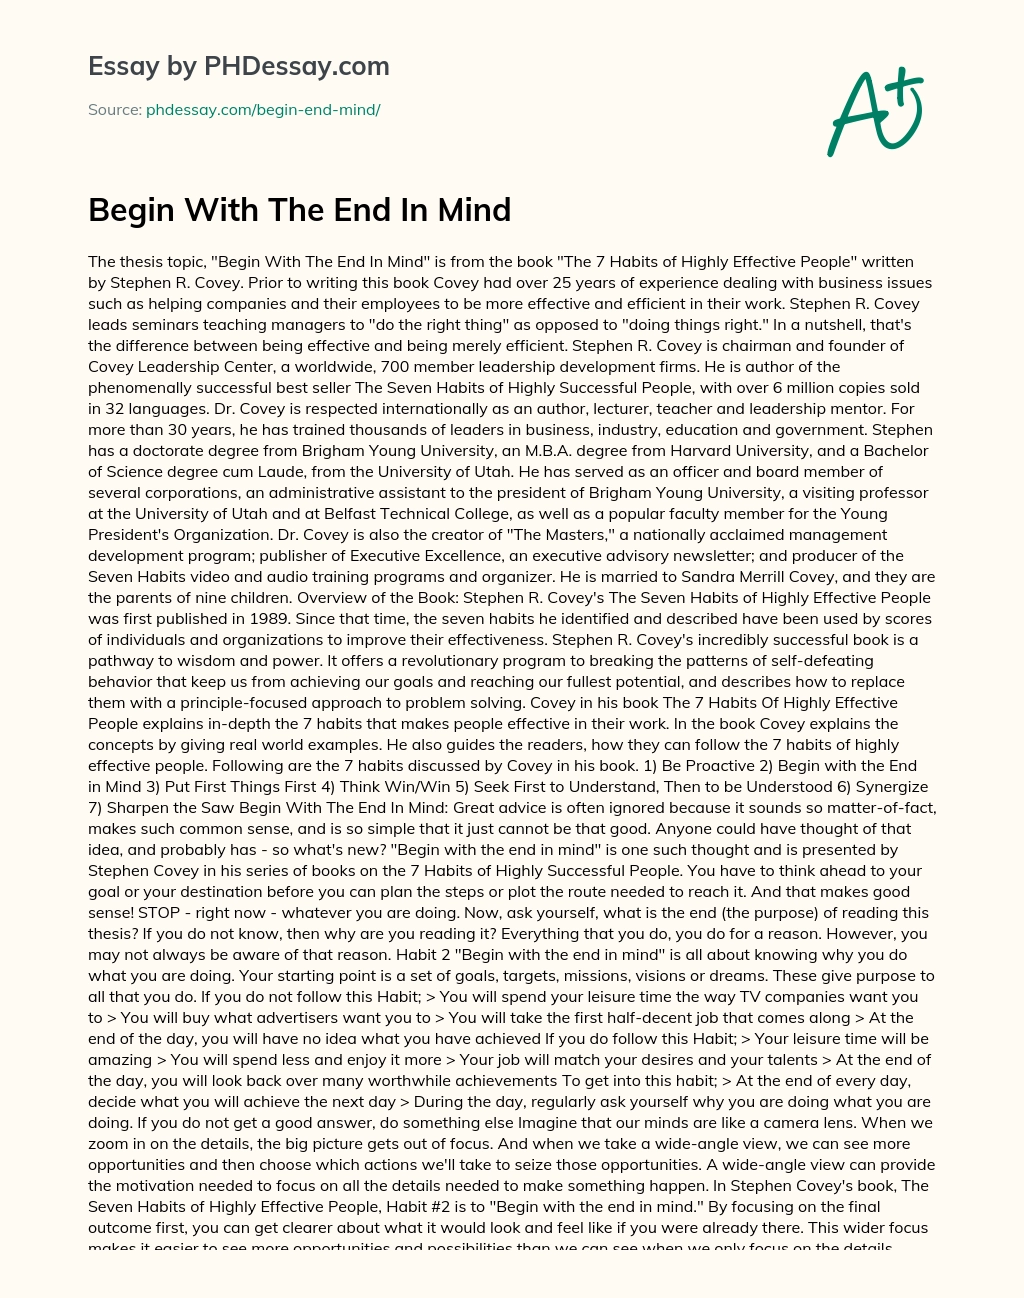 Begin With The End In Mind essay